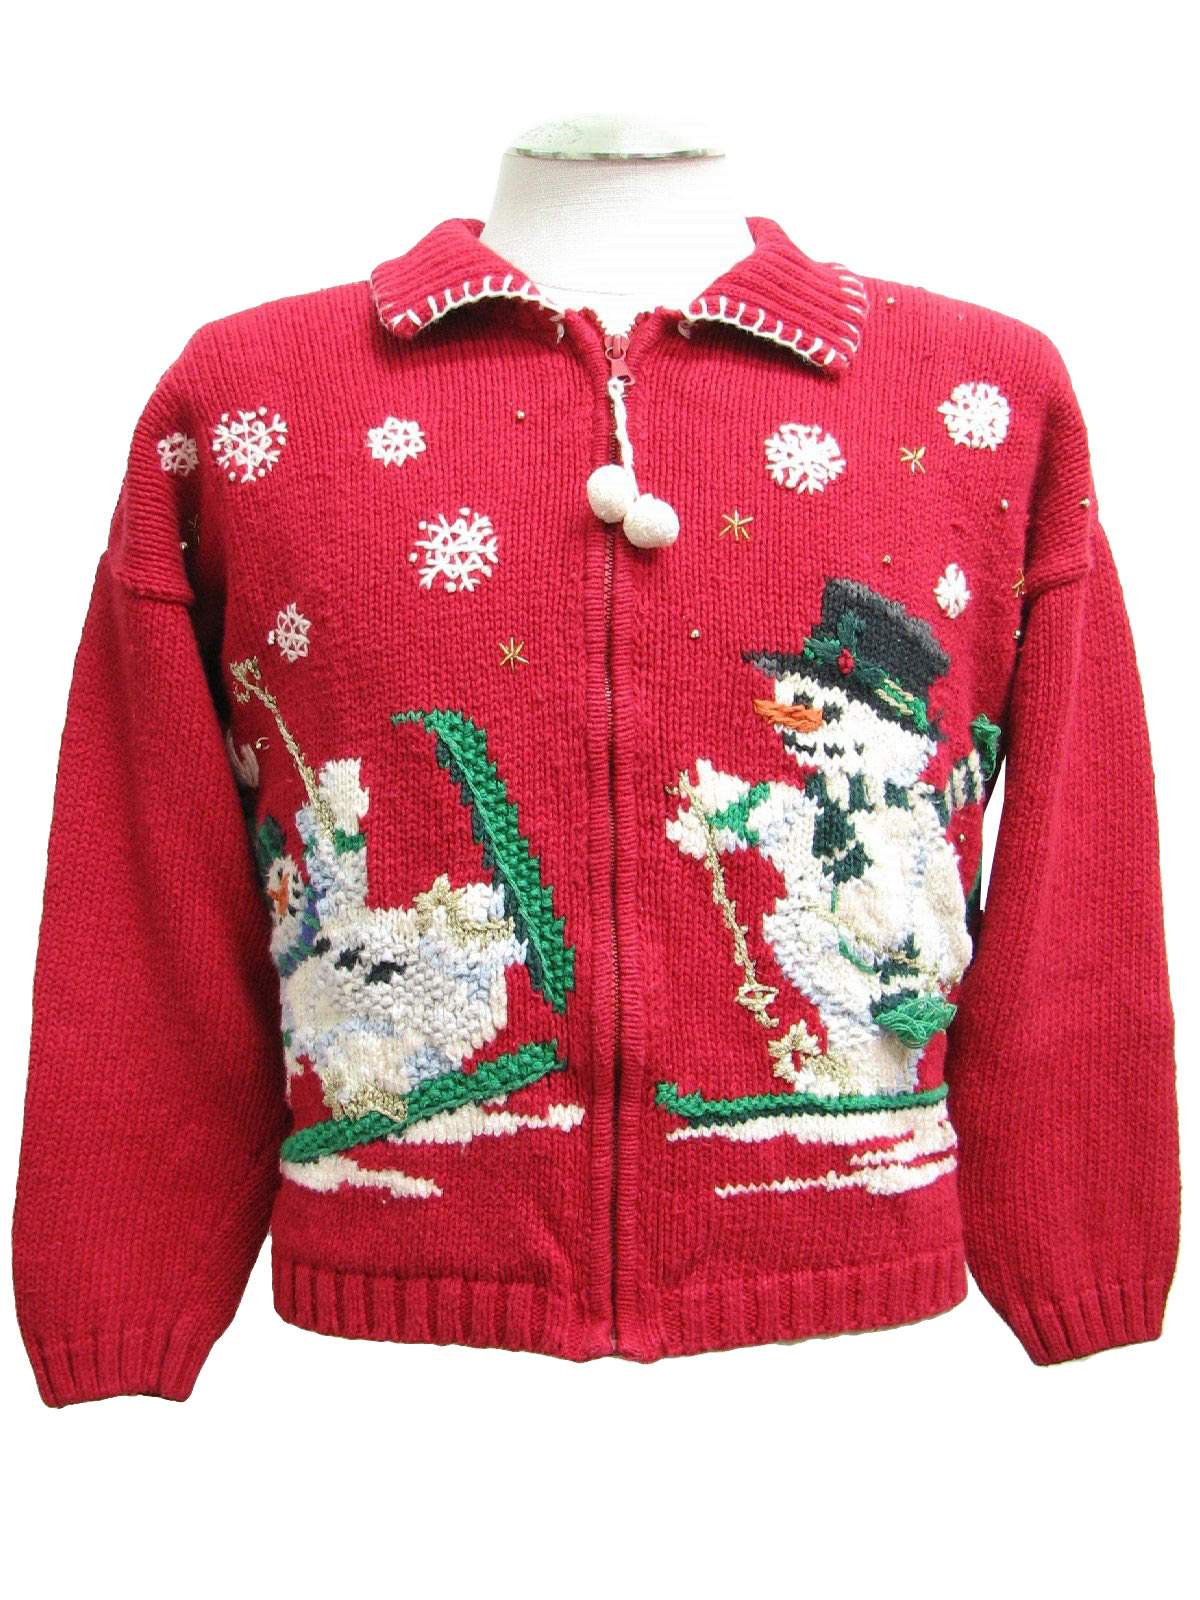 Womens Ugly Christmas Sweater: -Fashion Bug- Womens red background ...